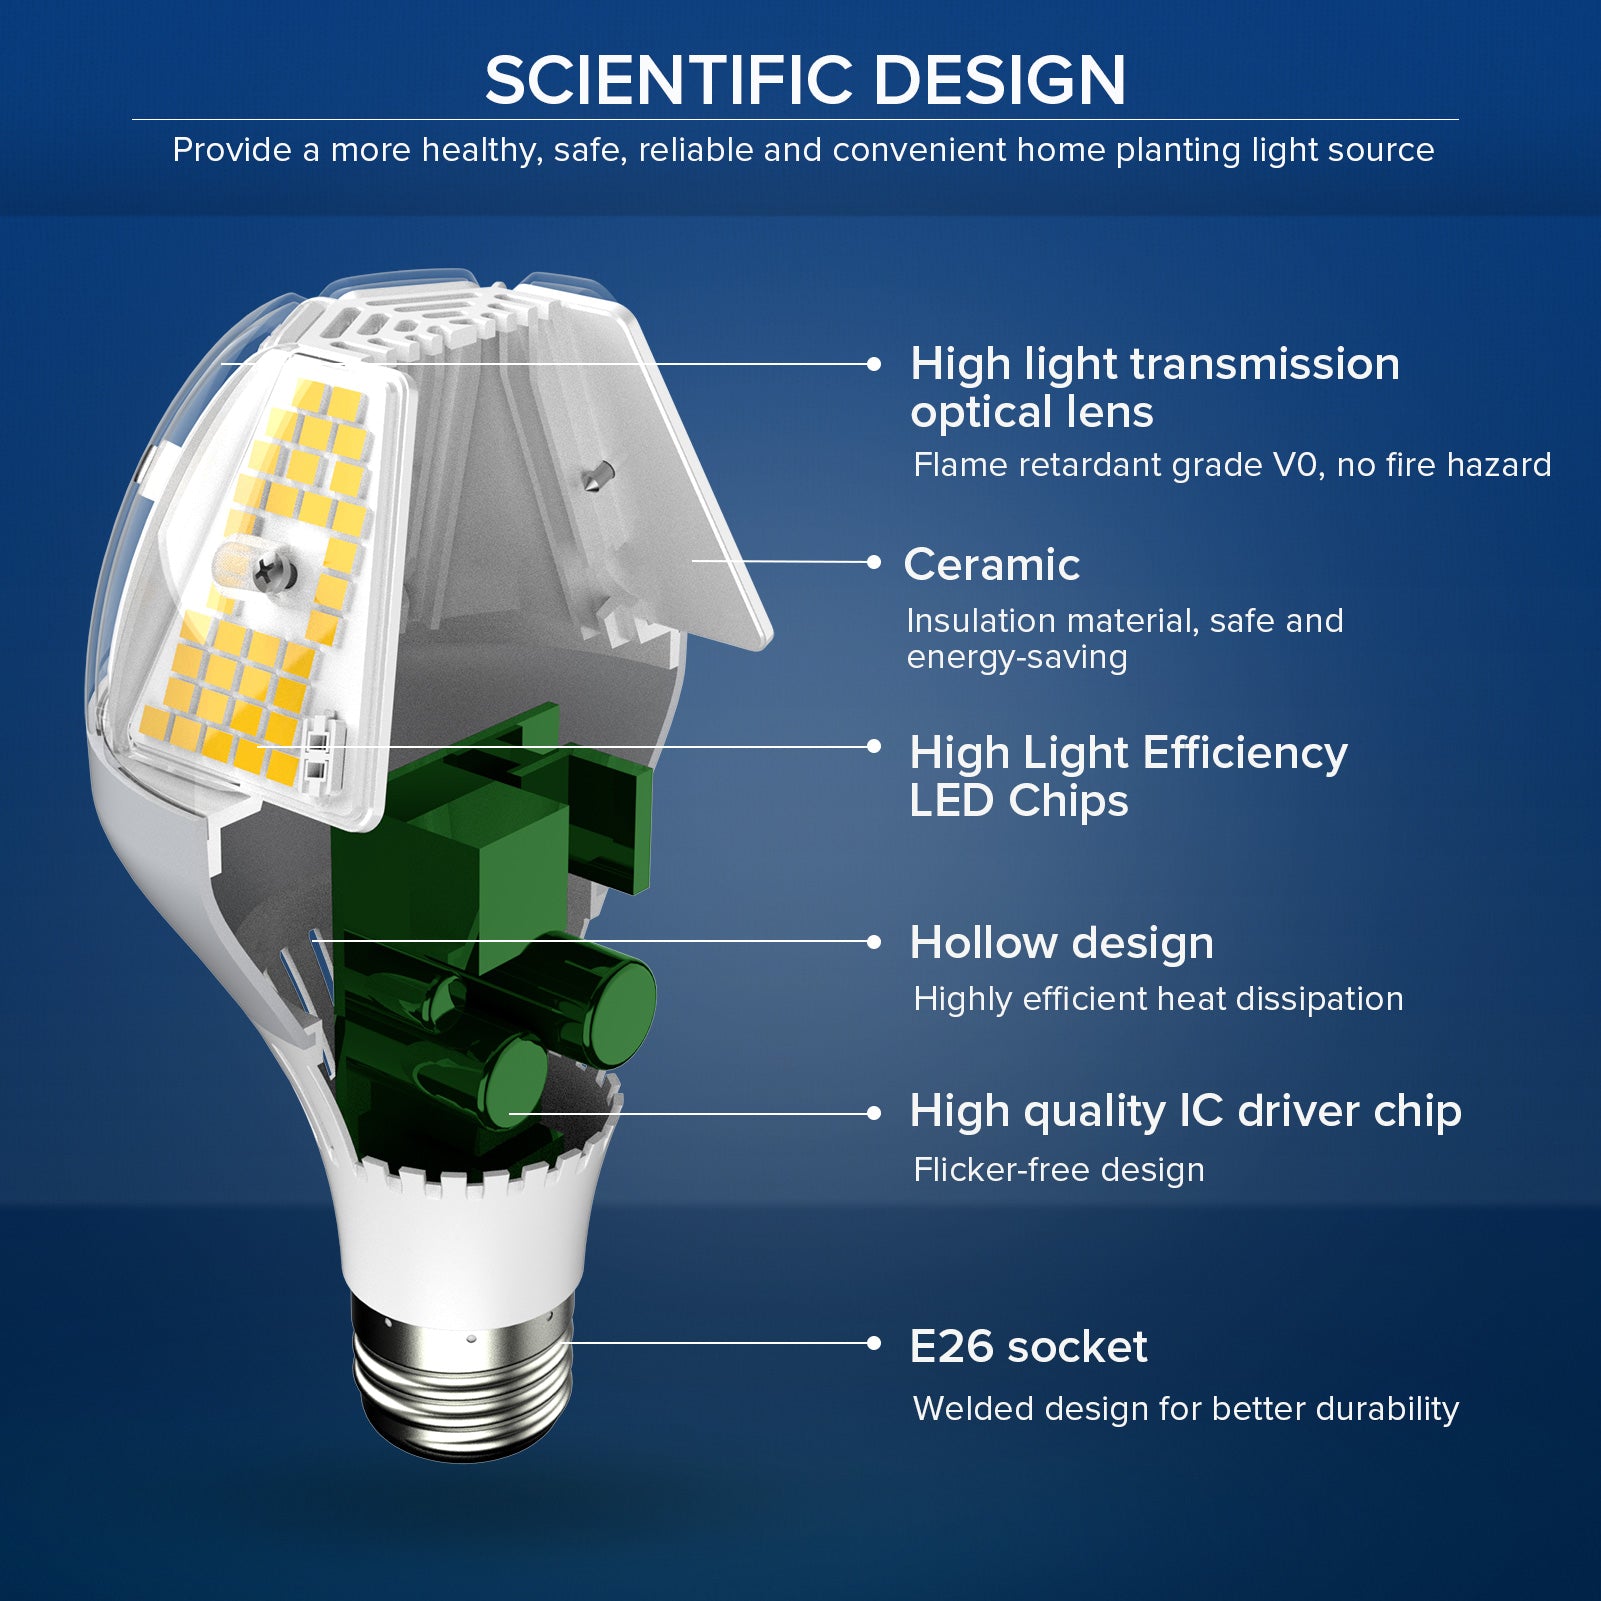 Scientific design of A21 35W LED Light Bulb (US/CA ONLY)，Provide a more healthy, safe, reliable and convenient home planting light source.